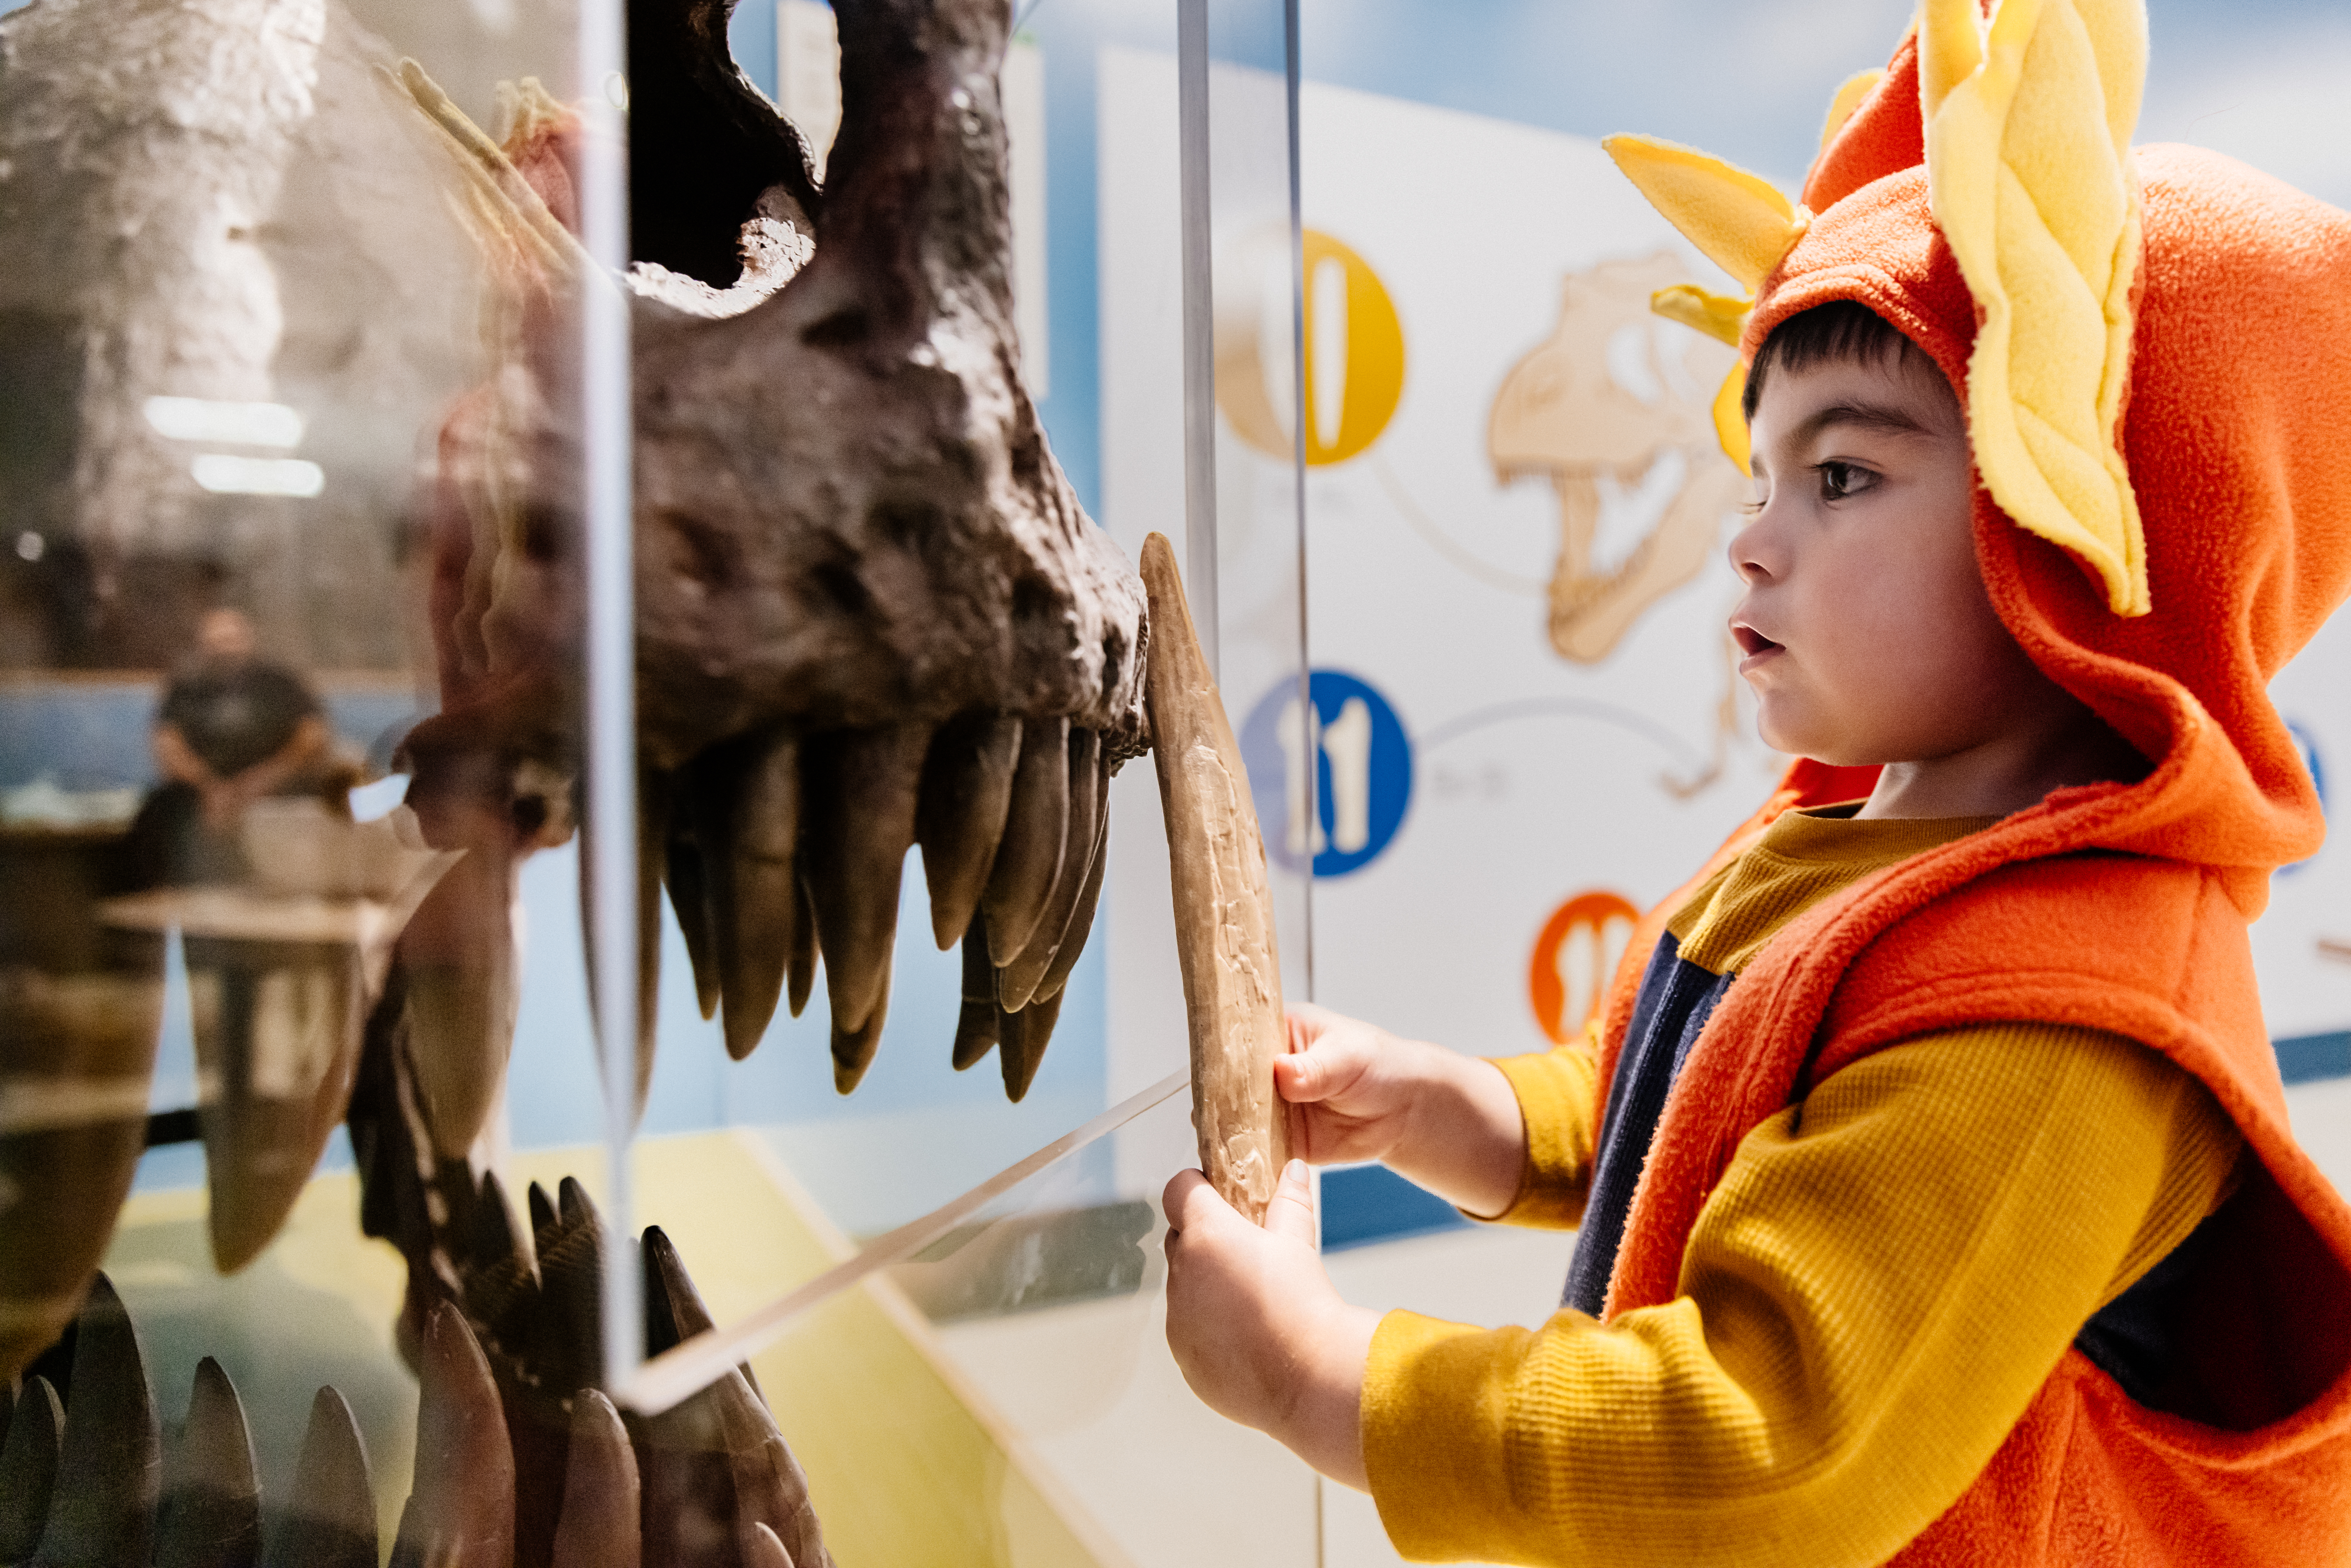 a young child wearing a yellow and orange dinosaur costume stands looking into a glass museum case containing a t. tex fossil